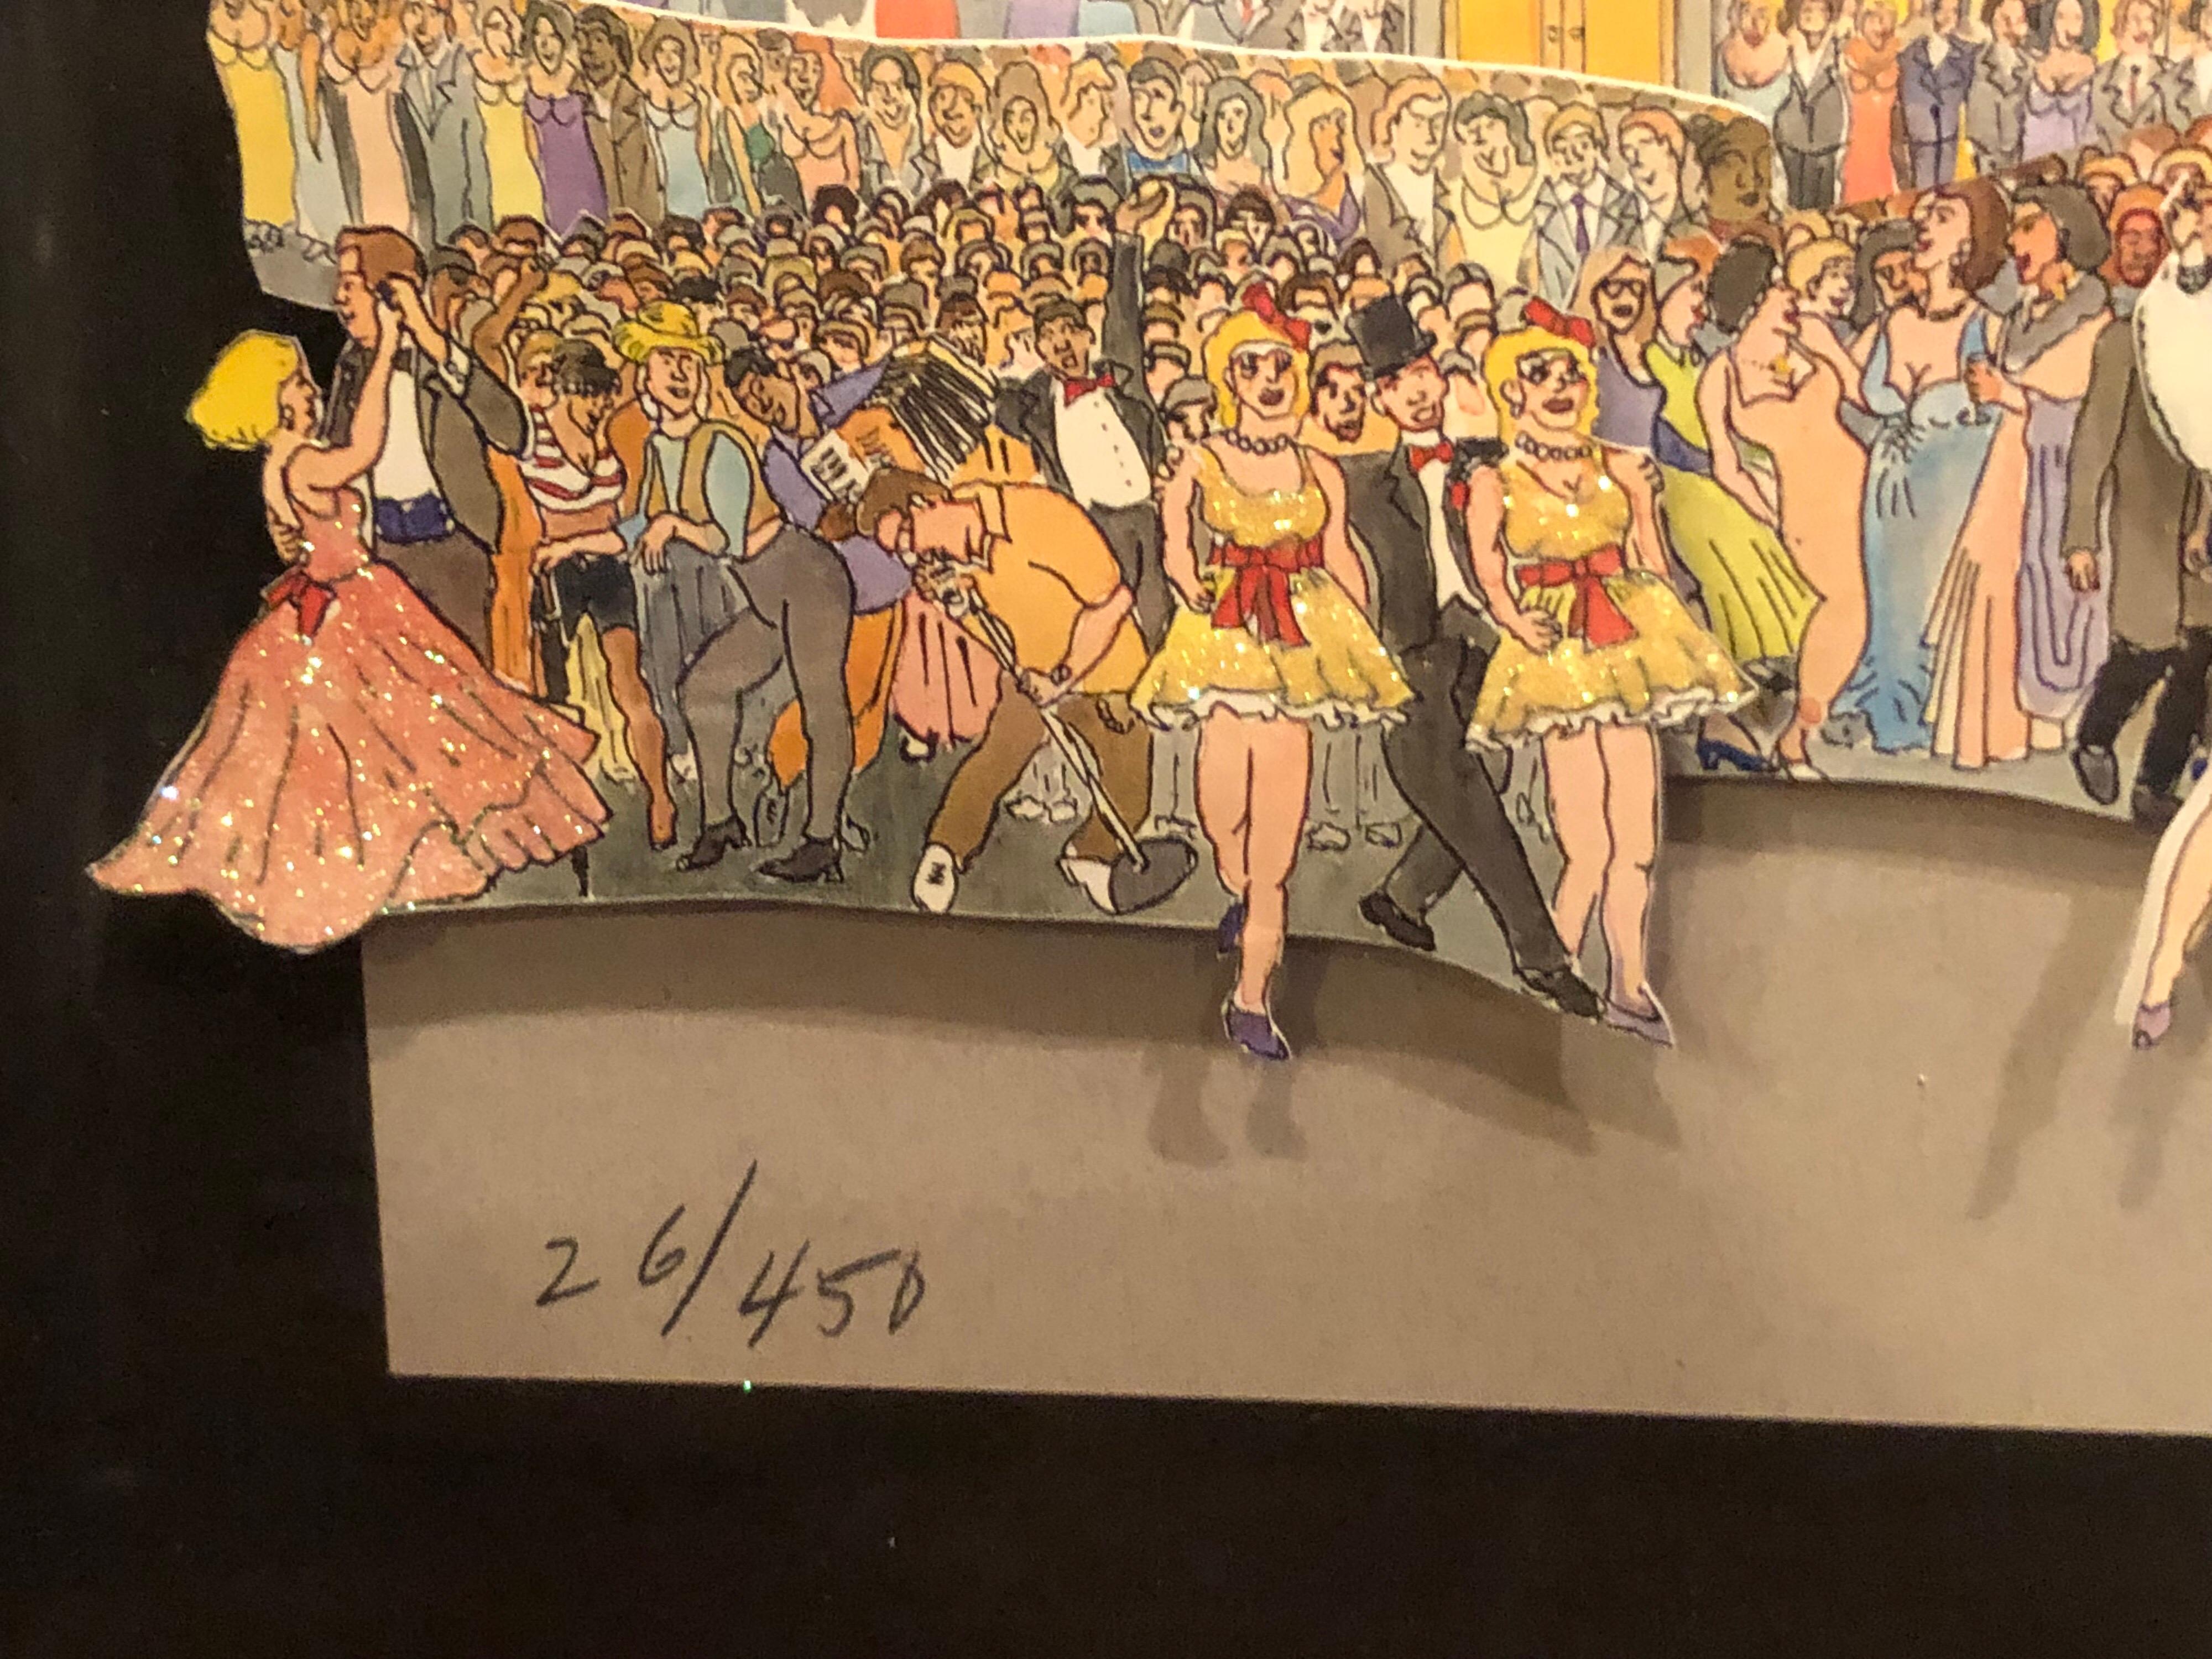 Signed 3 D Art of Broadway by McCue 2